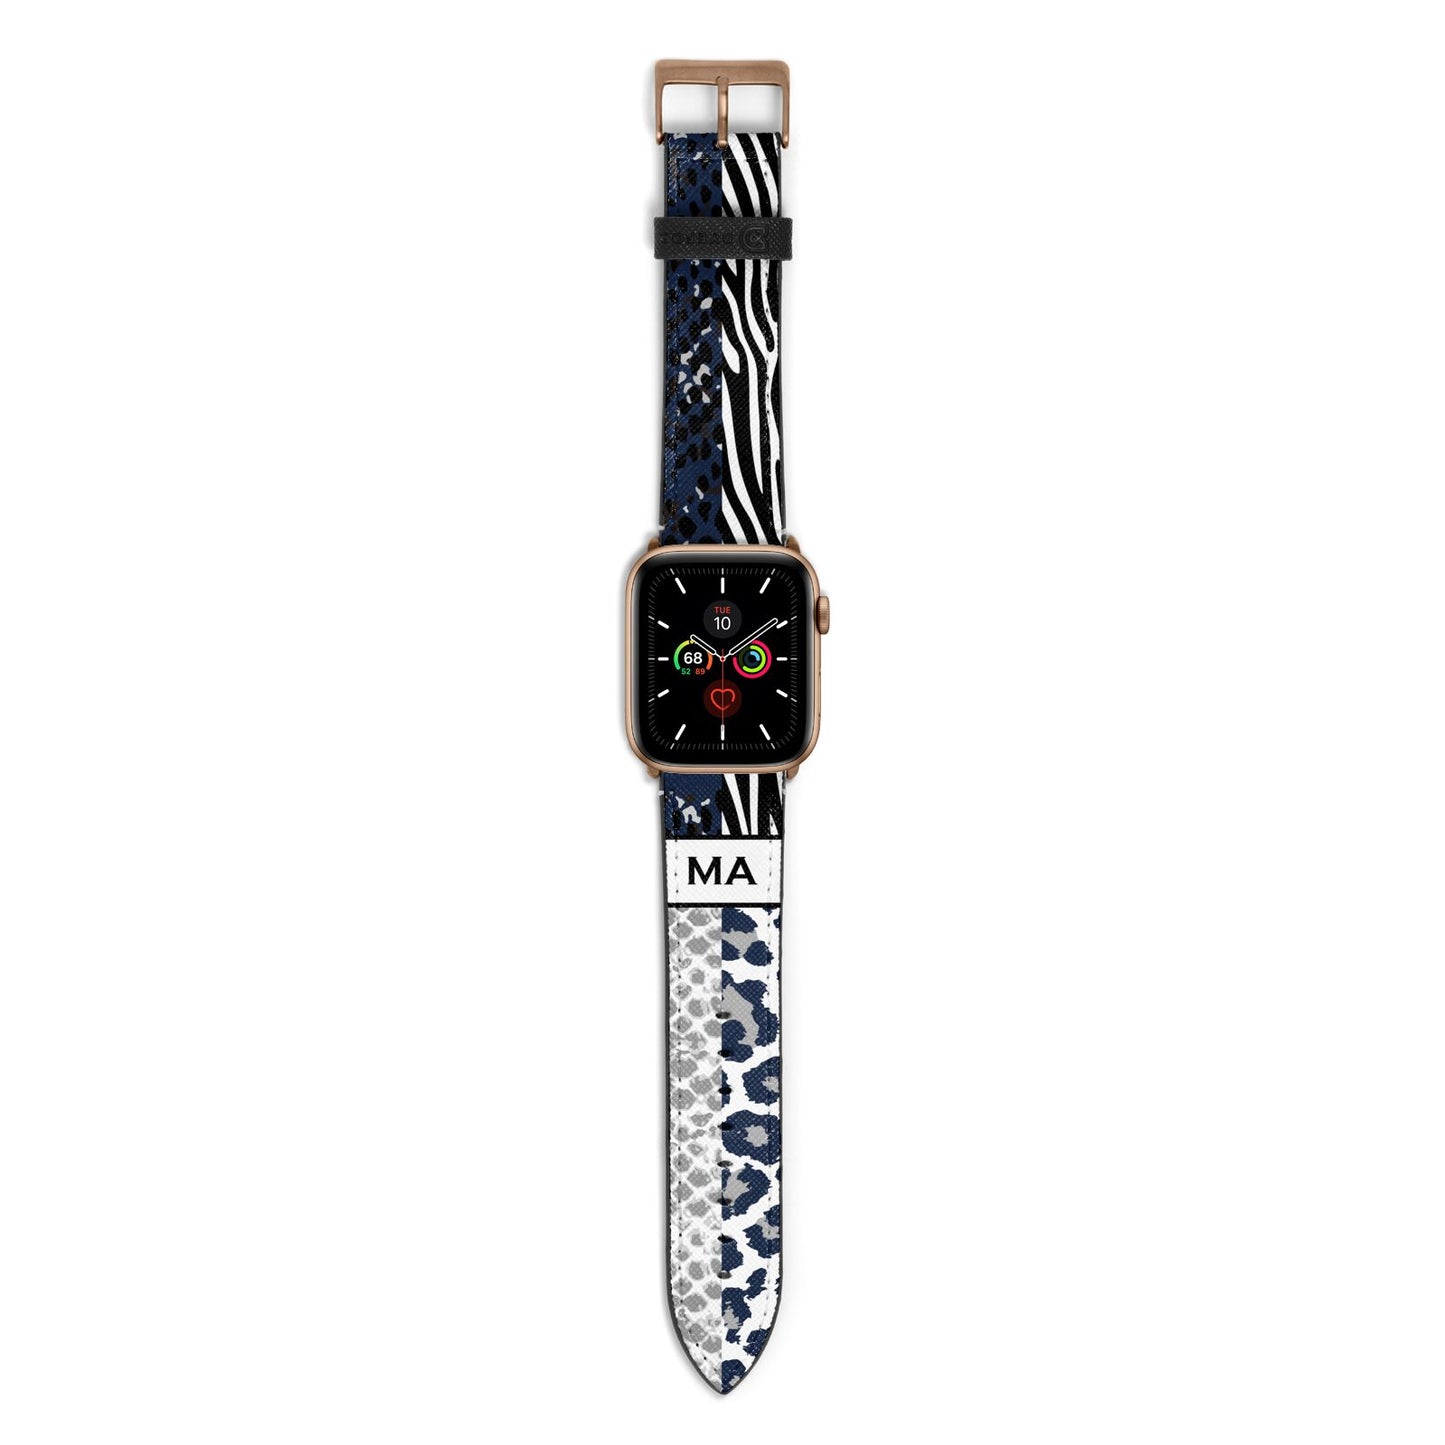 Personalised Animal Print Apple Watch Strap with Gold Hardware